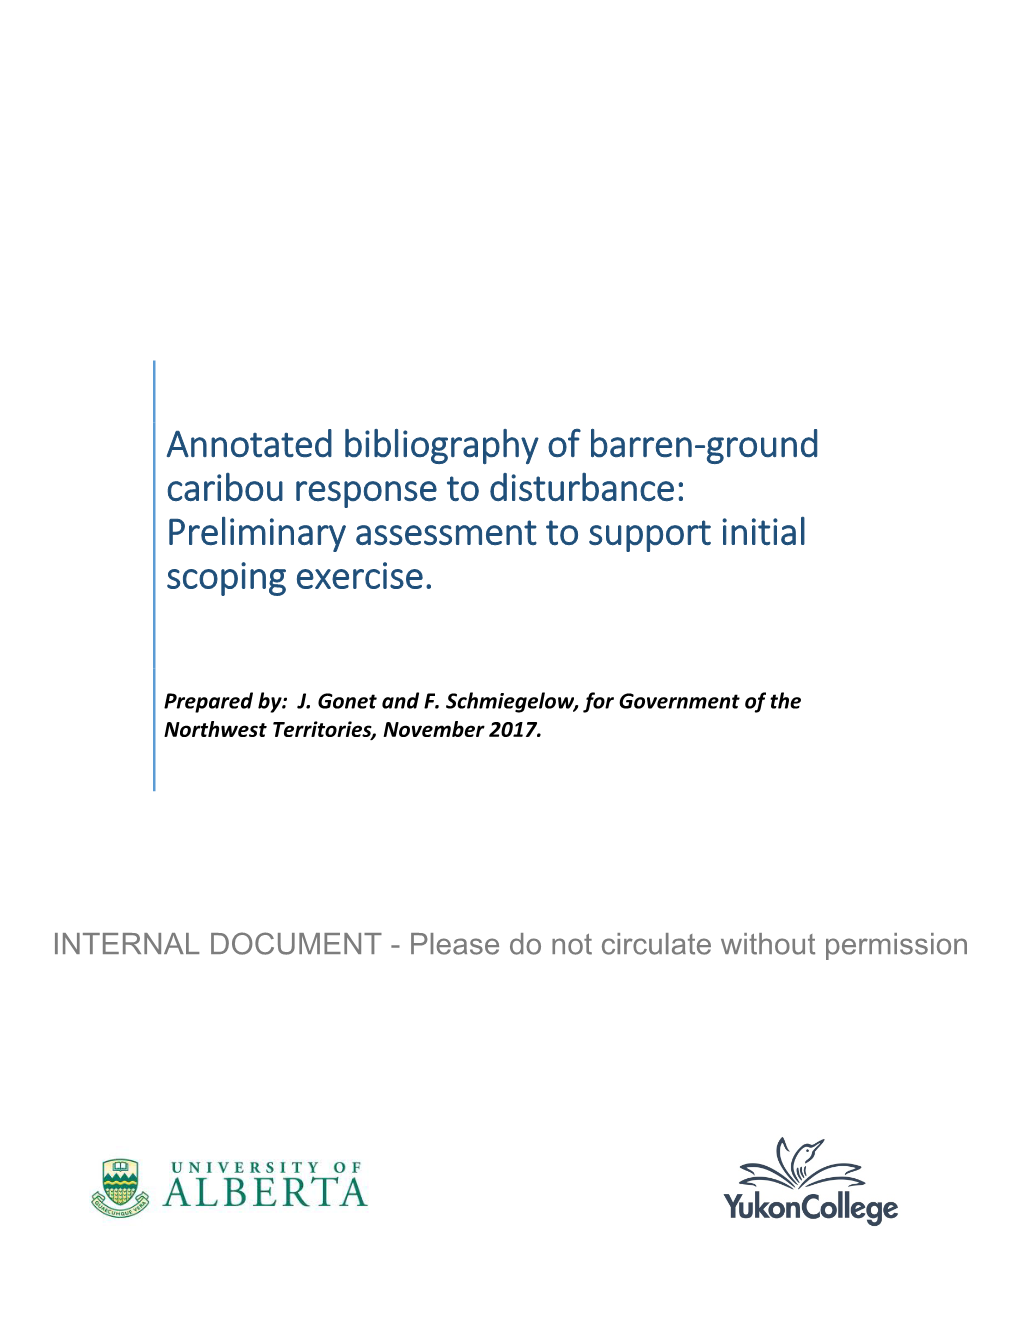 Annotated Bibliography of Barren‐Ground Caribou Response to Disturbance: Preliminary Assessment to Support Initial Scoping Exercise